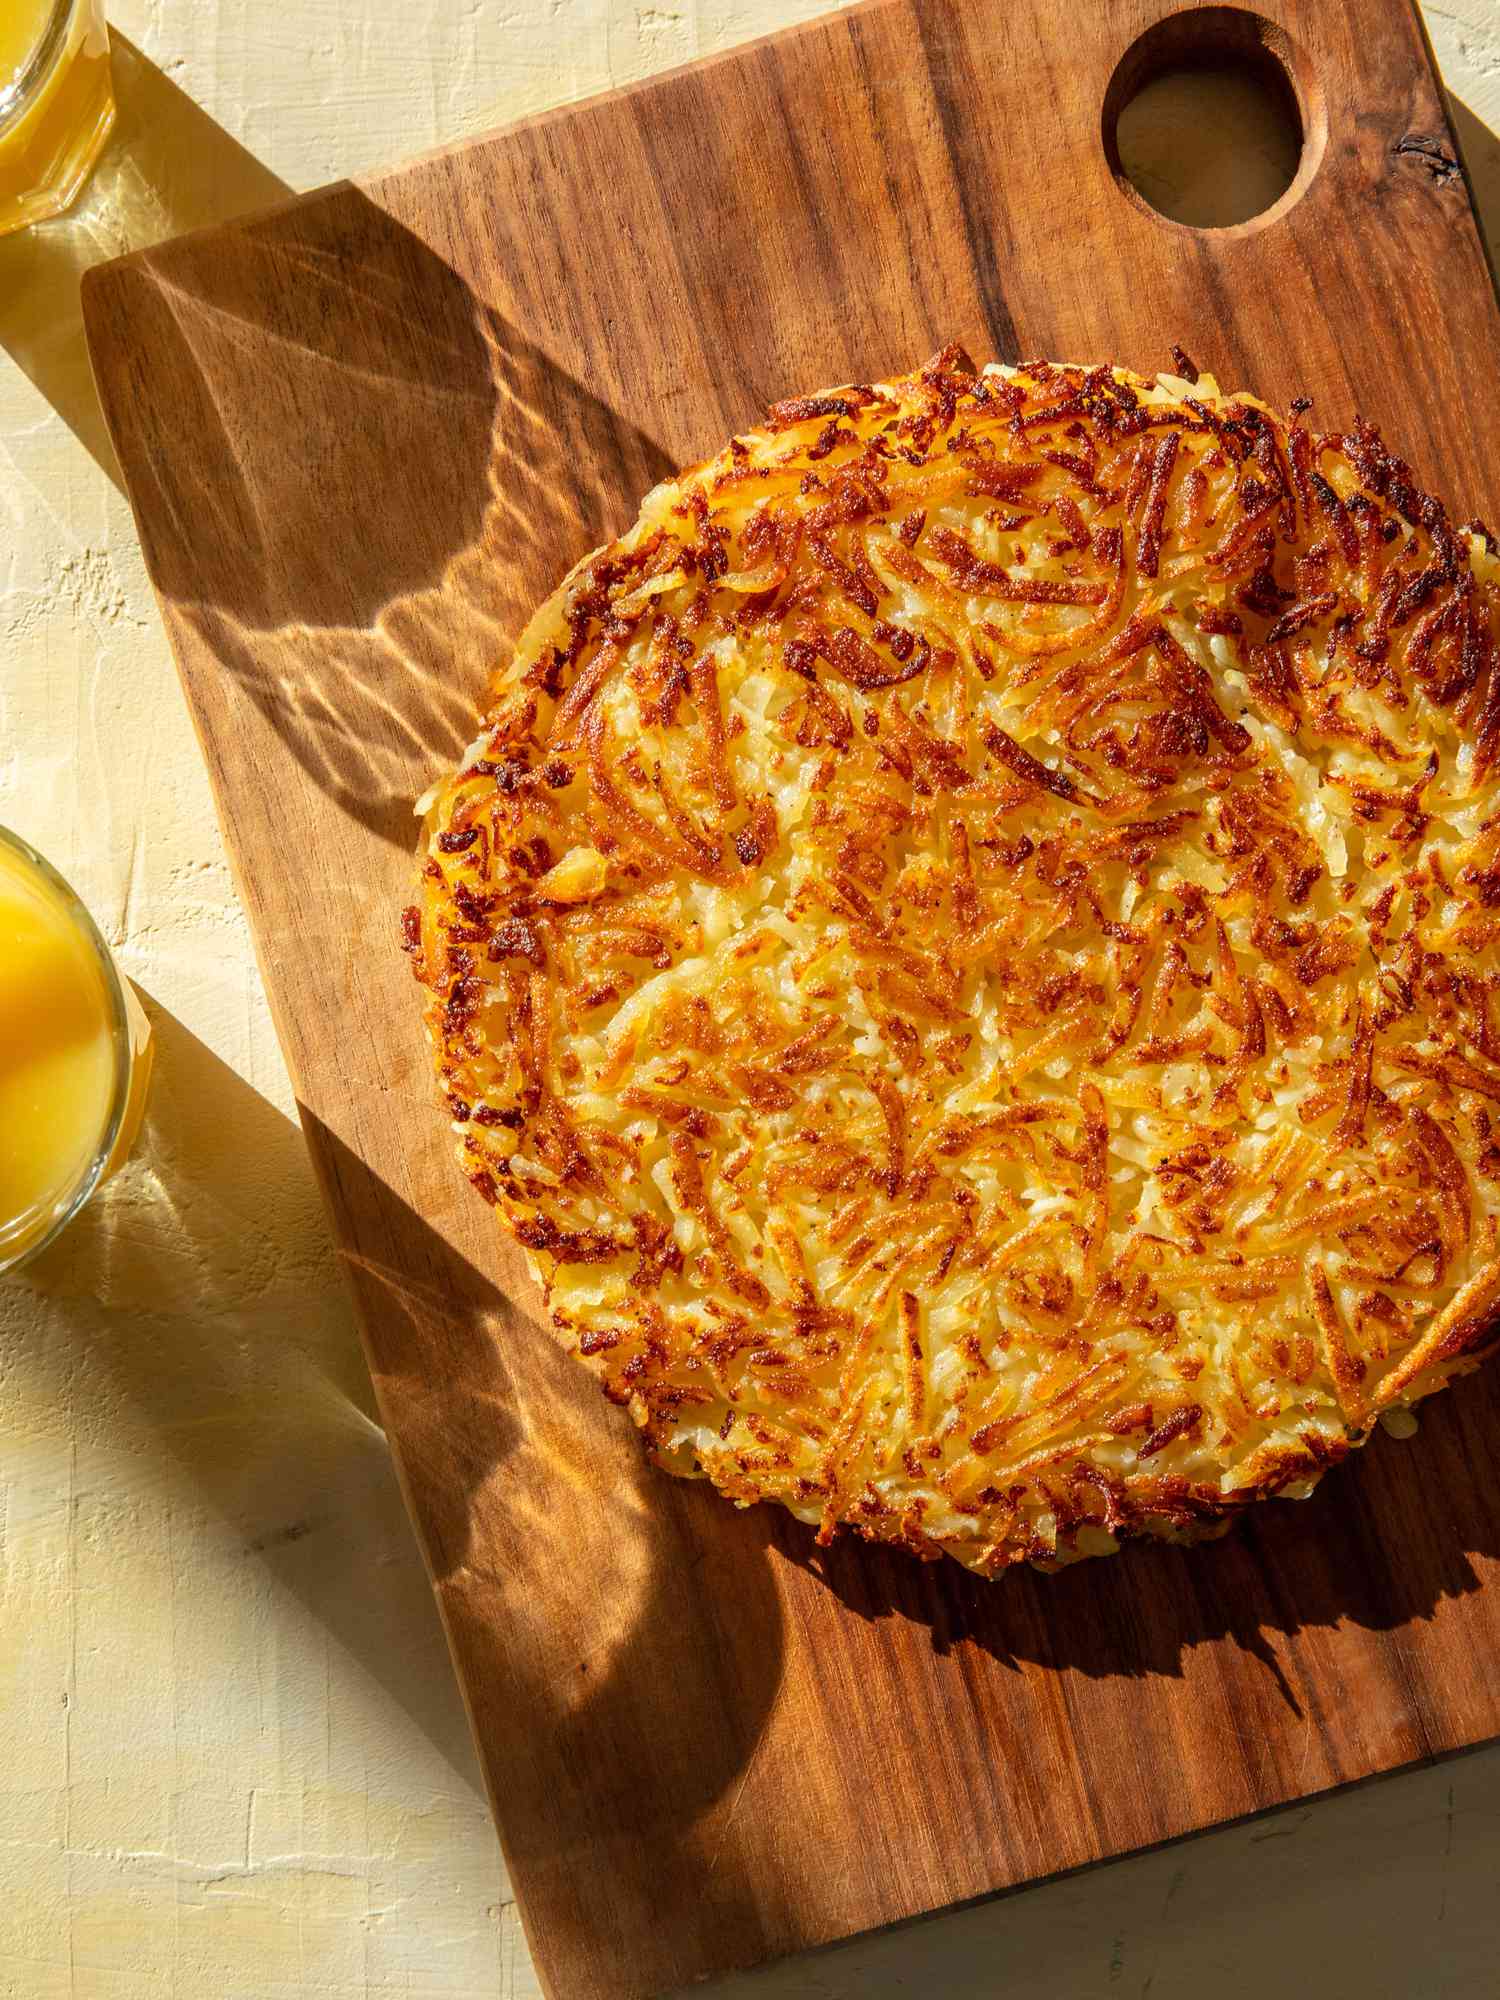 RÃ¶sti on a wooden board with glasses of orange juice nearby.